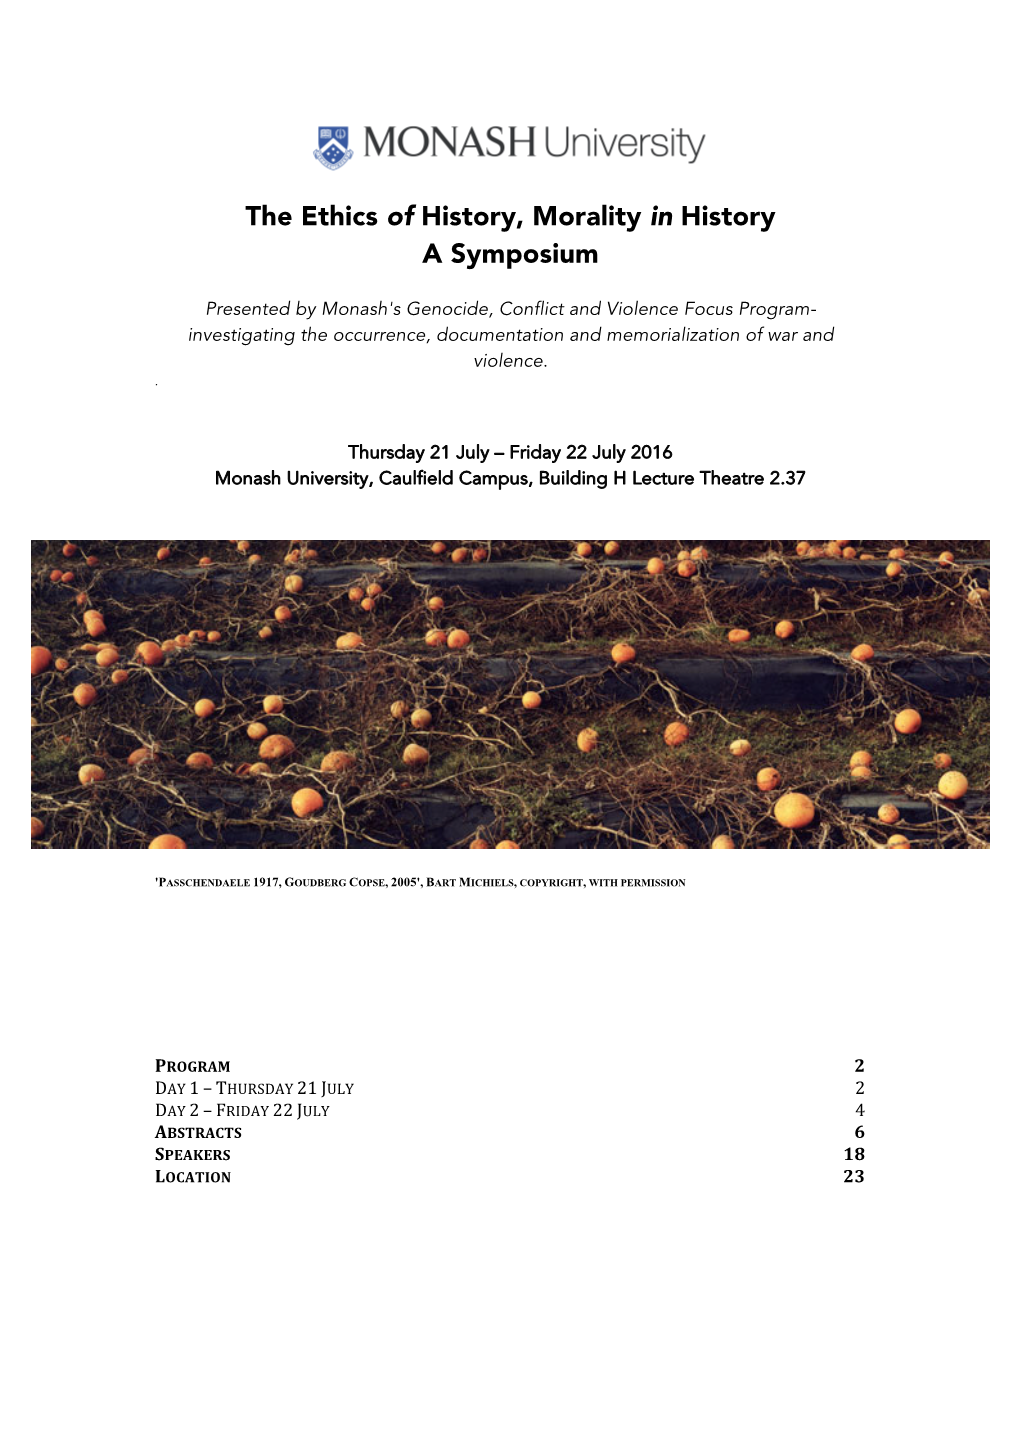 The Ethics of History, Morality in History a Symposium